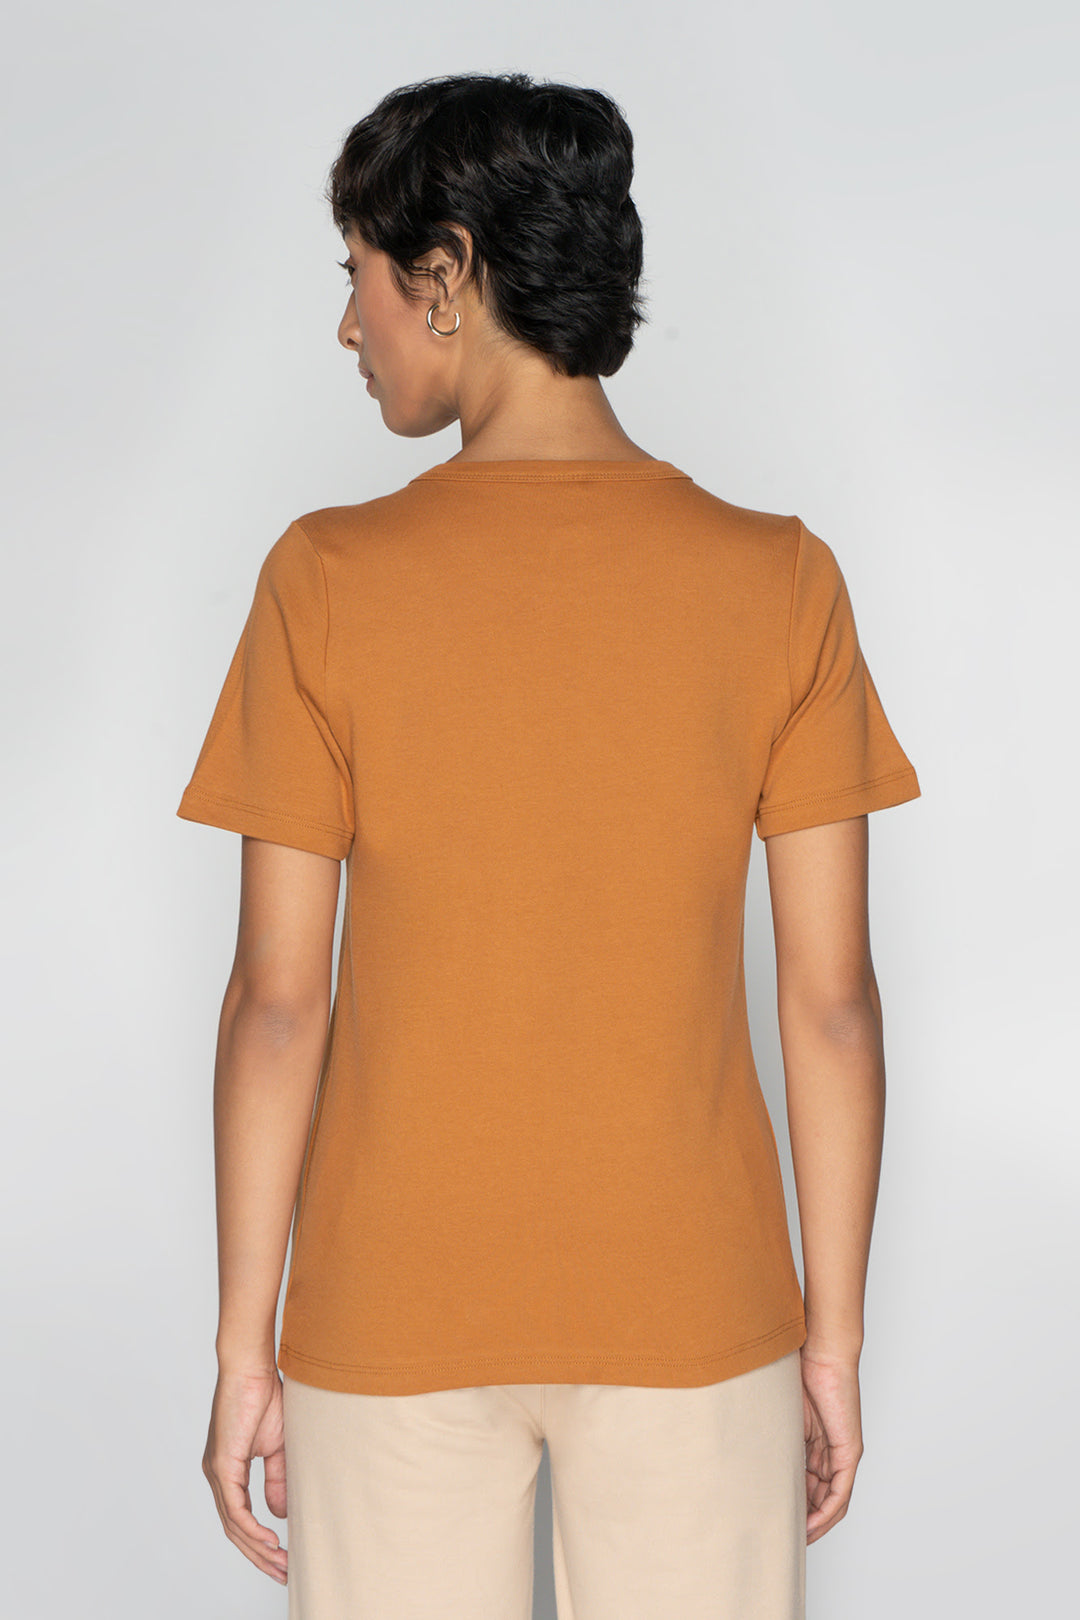 Dress Code Basic Relaxed Fit T-shirt